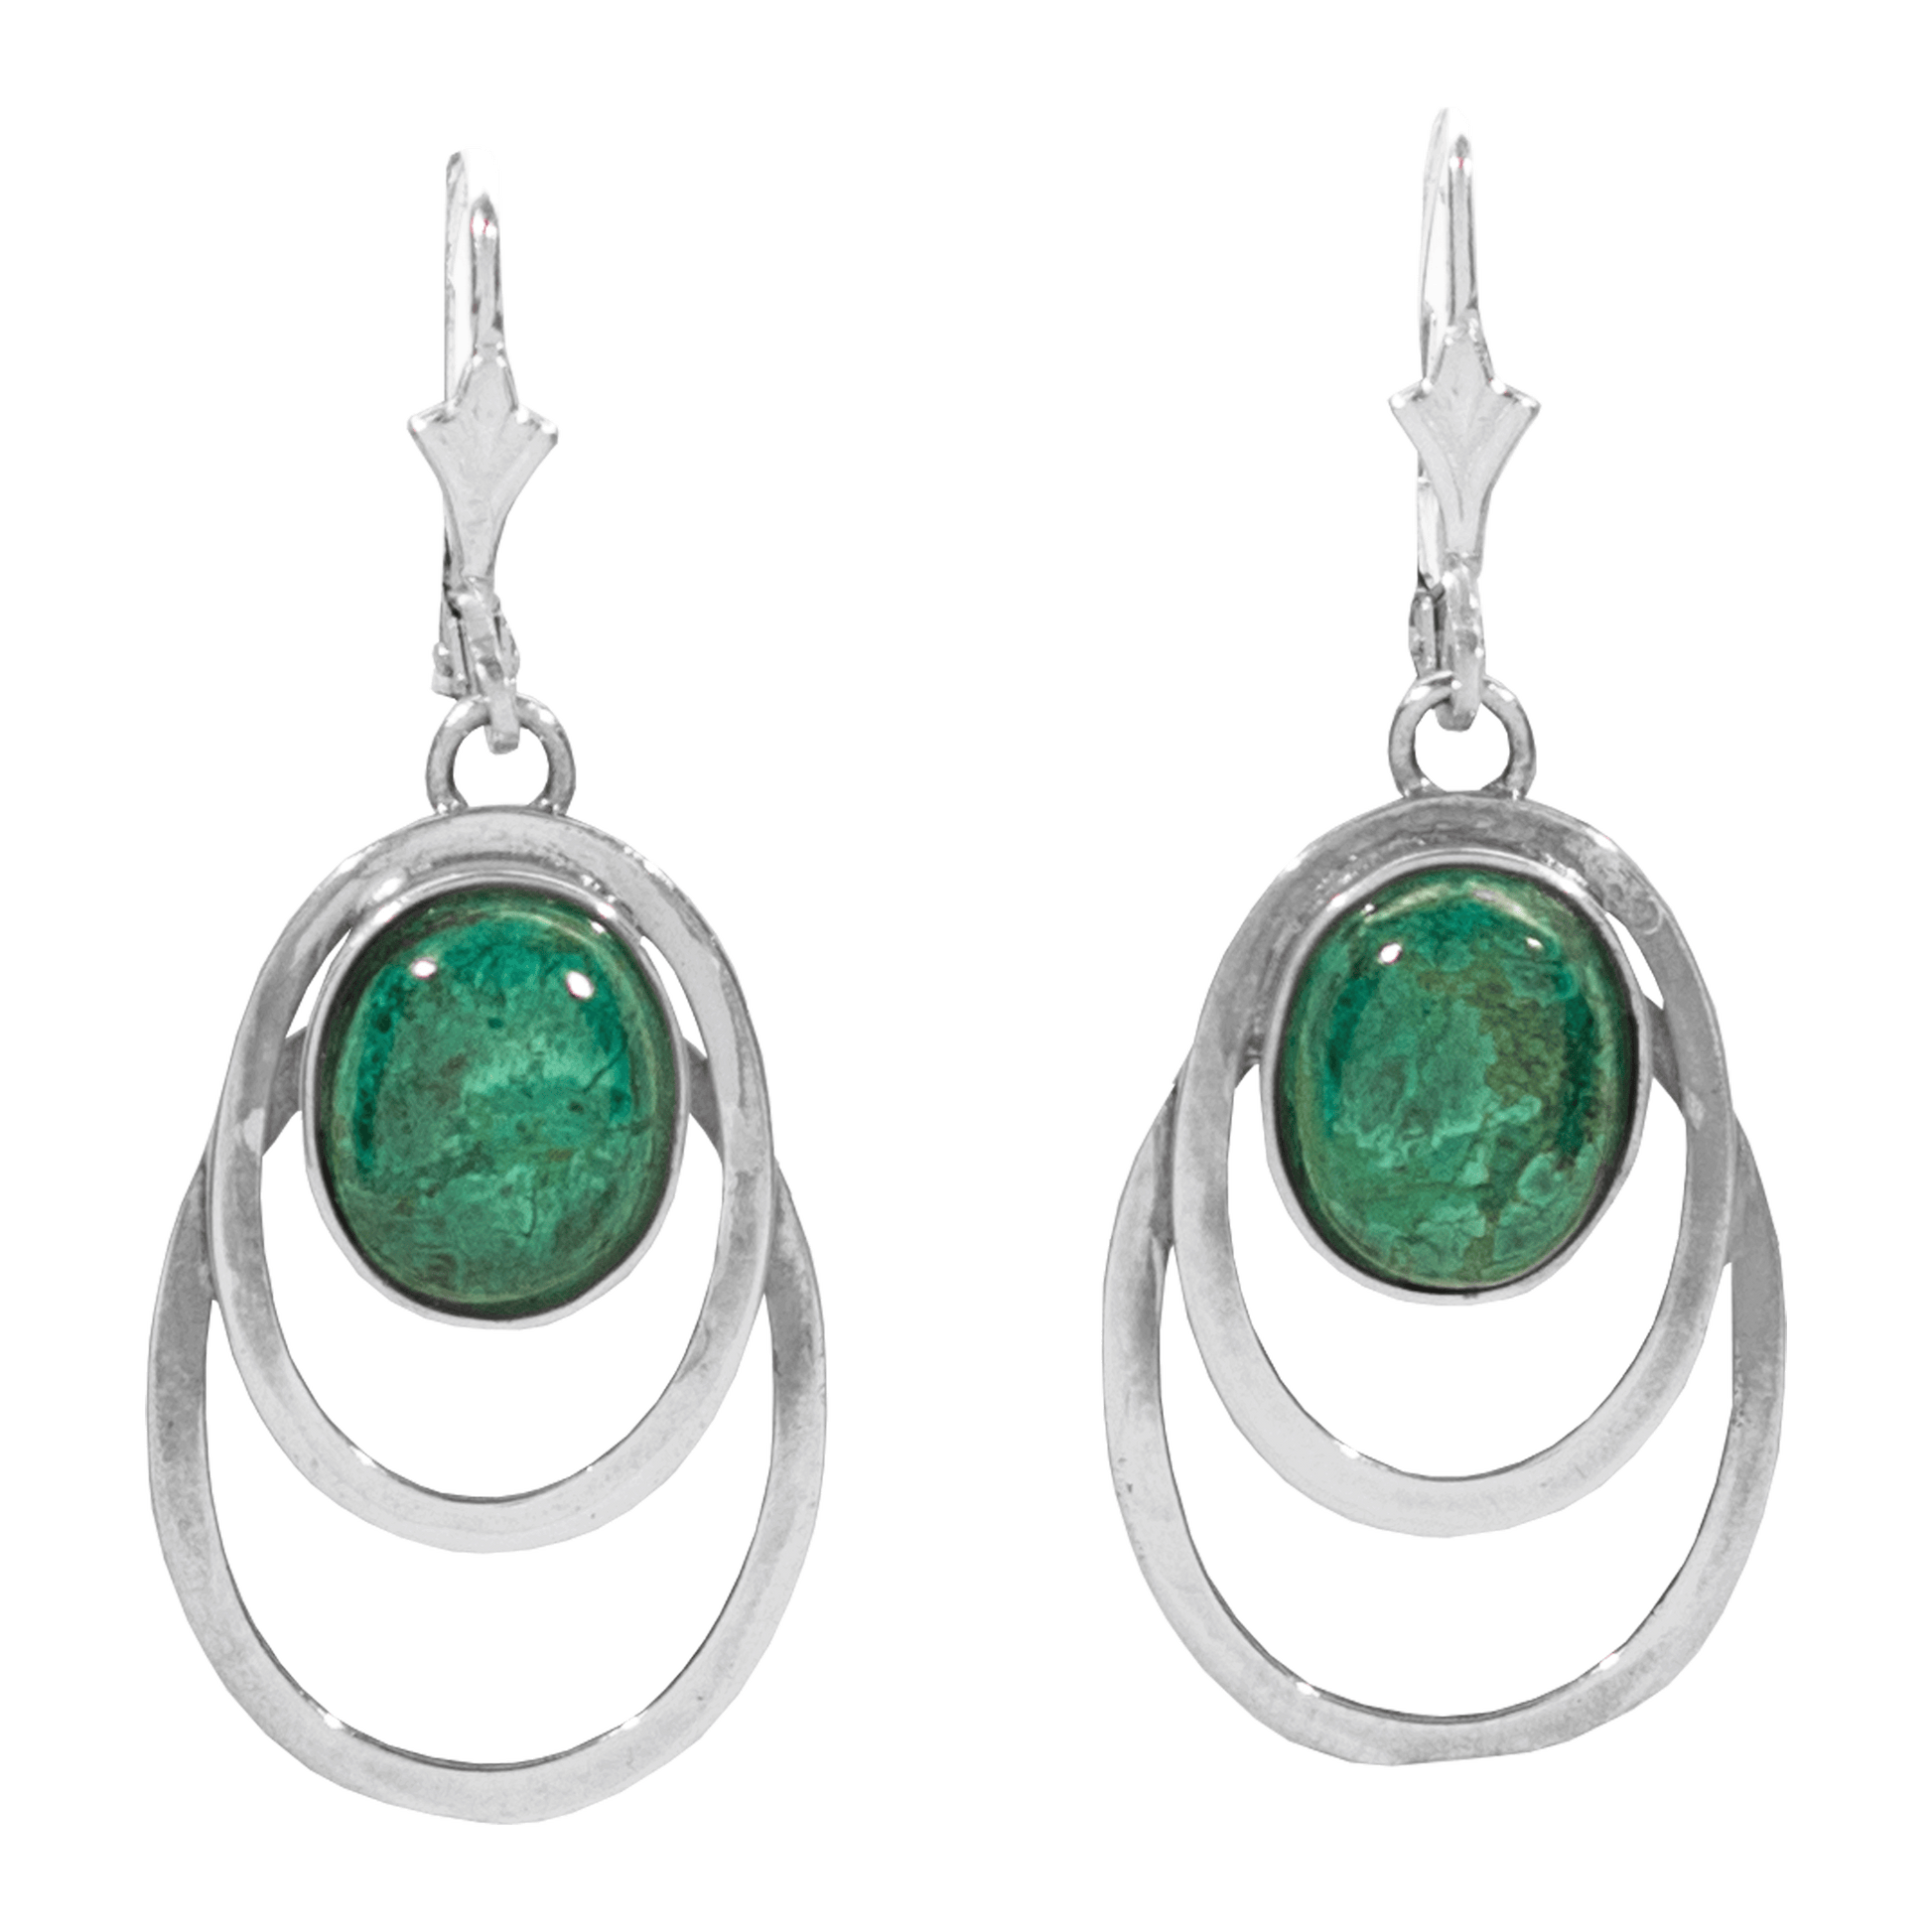 two optical sterling silver ovals with an oval-shaped Eilat Stone in the center earrings